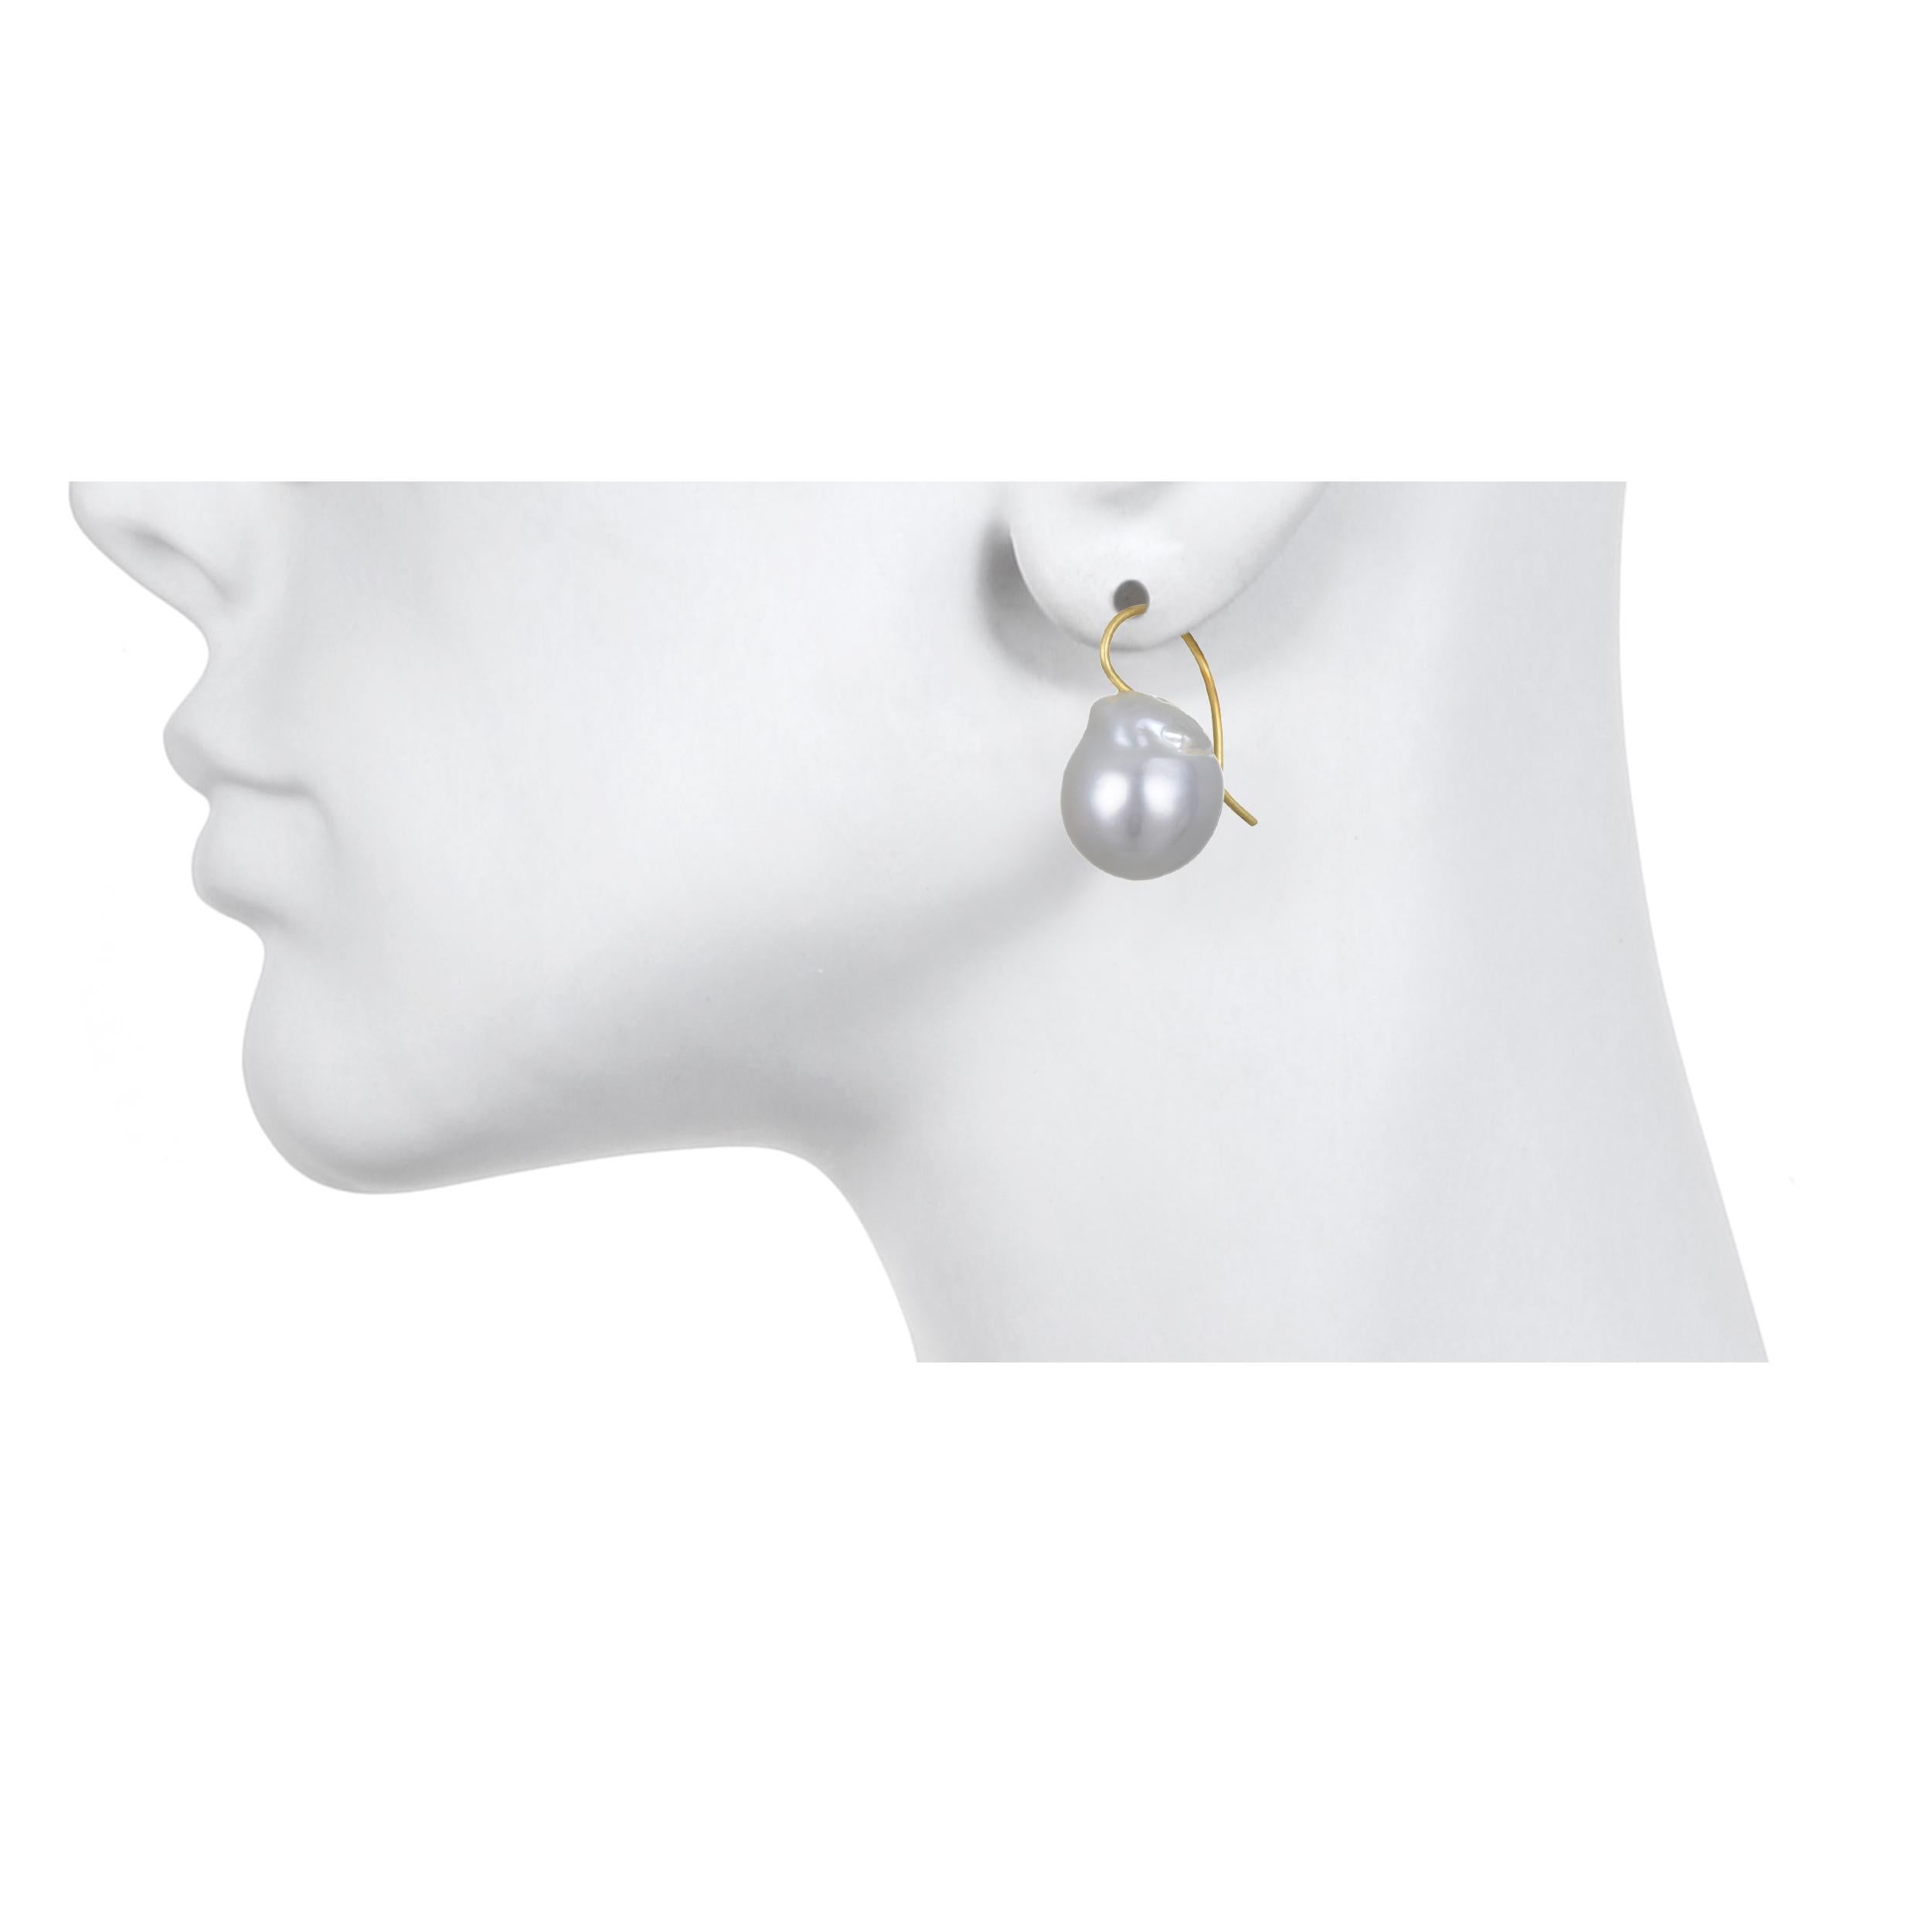 Classic, timeless, and simply chic, Faye Kim's lustrous White South Sea Baroque Pearl Drop earrings are finished with 18 karat gold ear wires. These earrings will never go out of style and can be paired with virtually any outfit or ensemble.

Color: